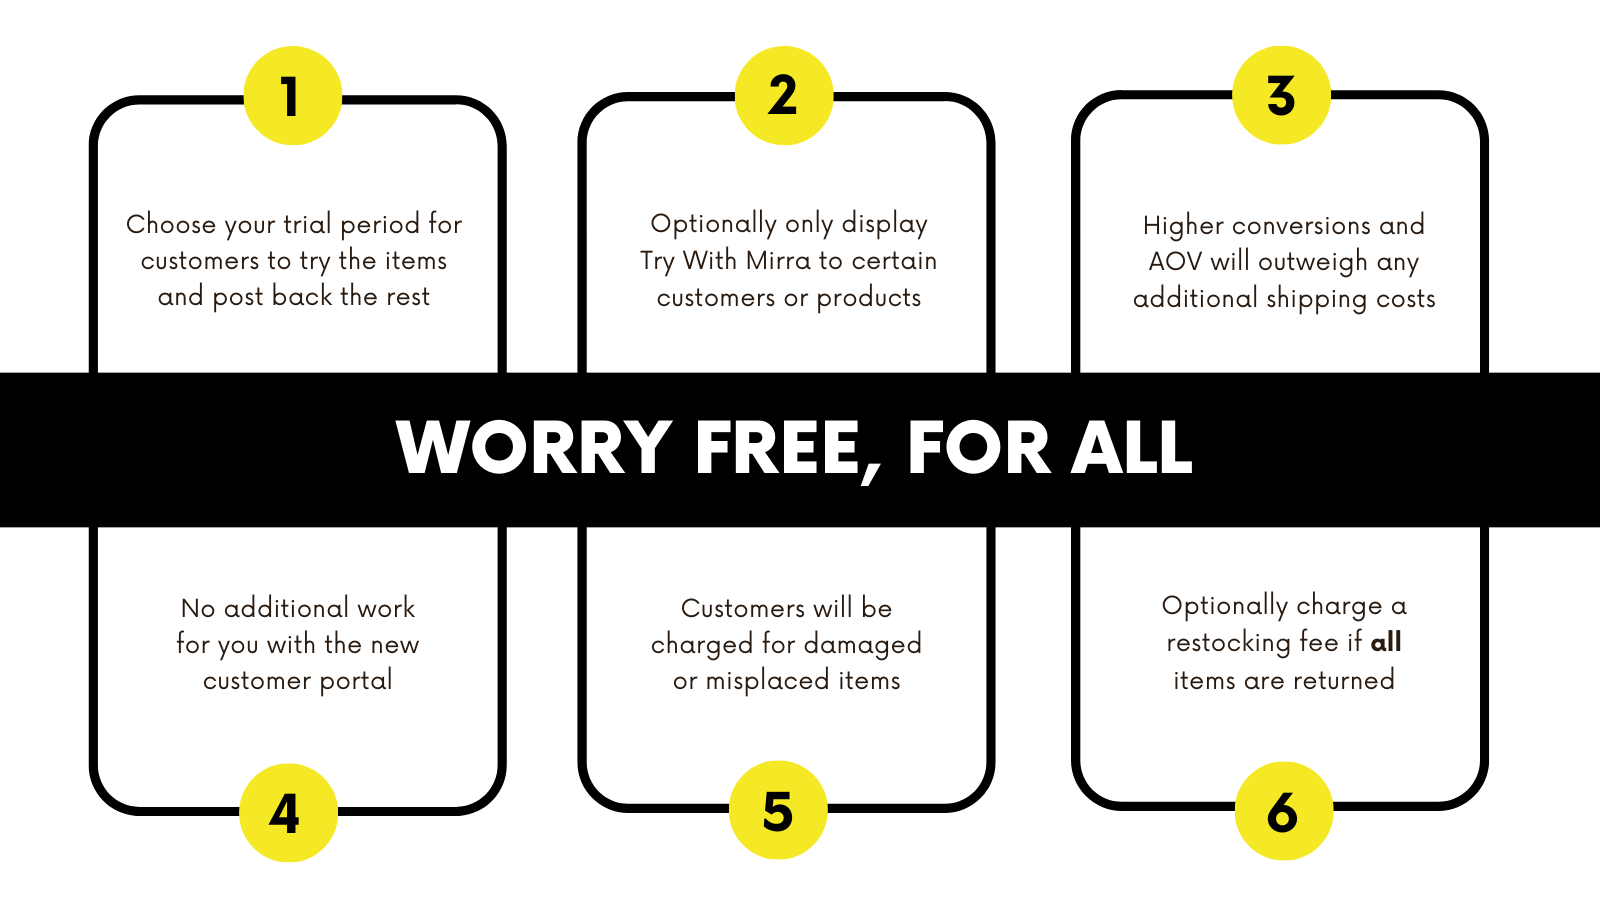 Worry free for all, FAQs answered